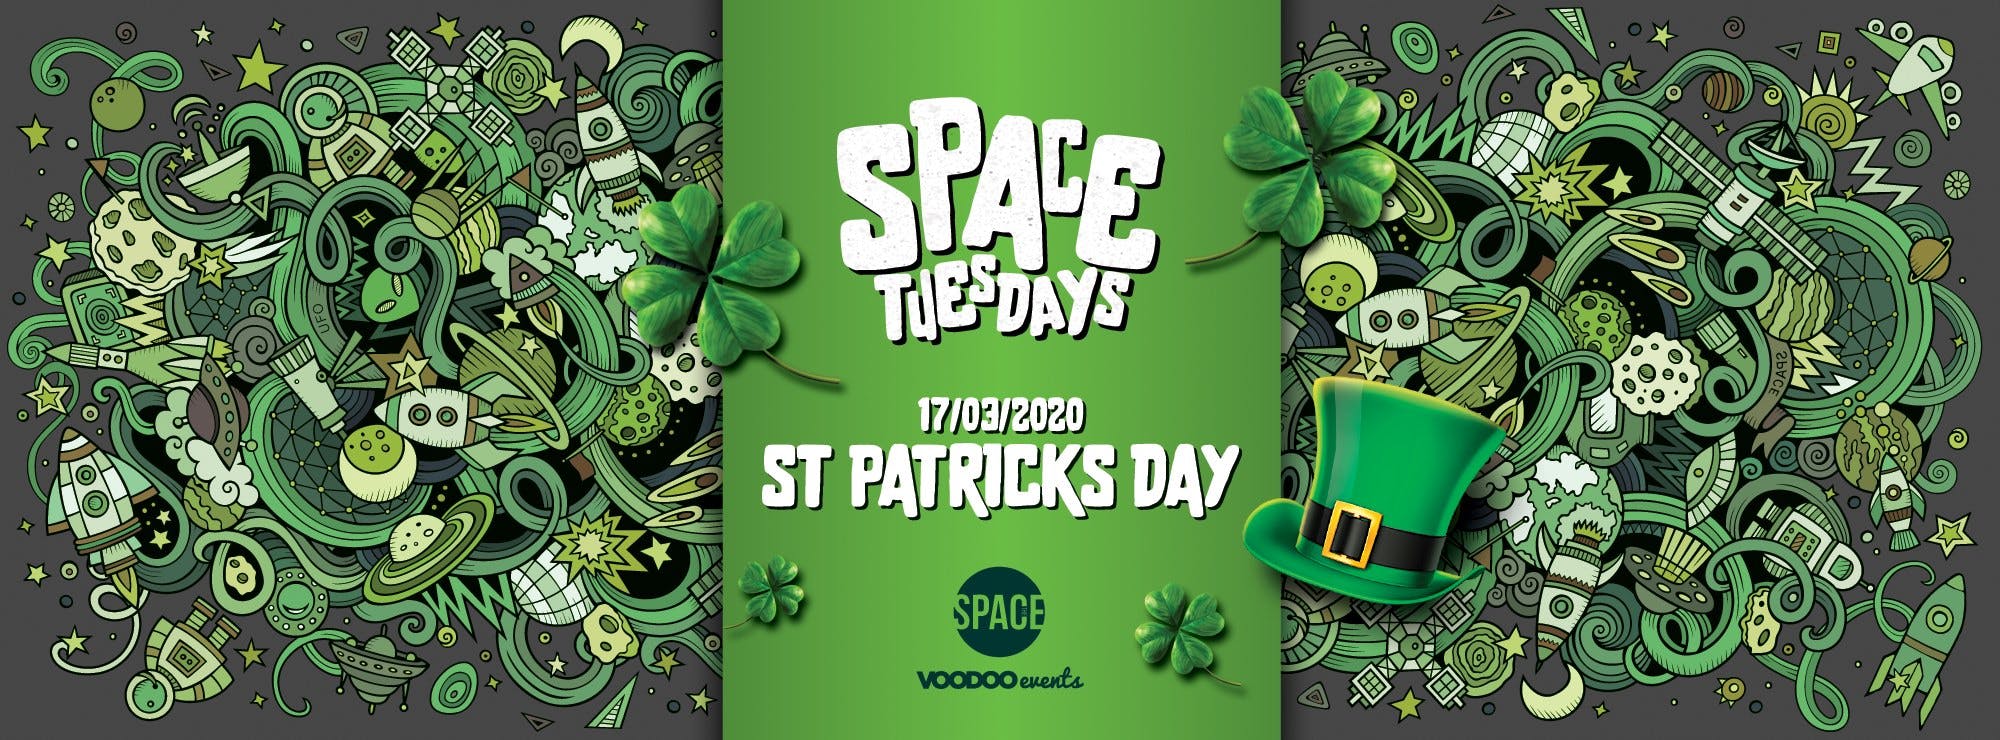 Space Tuesdays – St Paddys Special 17/03/20